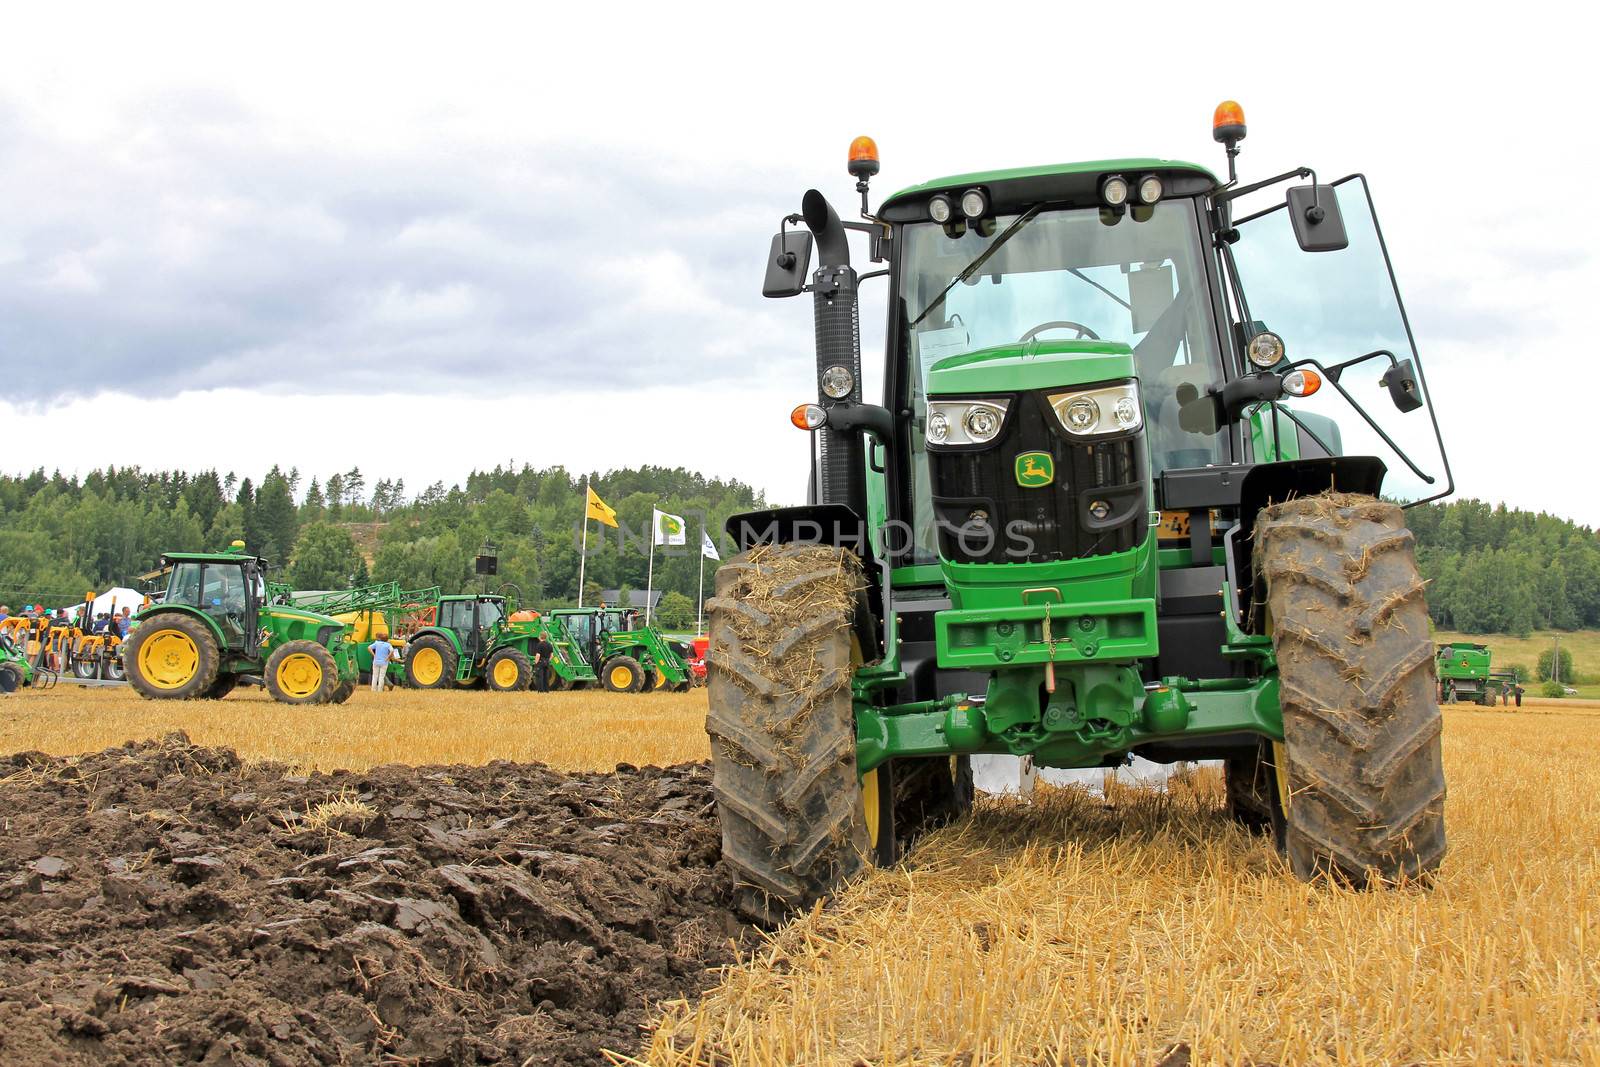 SALO, FINLAND - AUGUST10: John Deere 6150M agricultural tractor and plow at the annual Puontin Peltopaivat Agricultural Show in Salo, Finland on August 10, 2013.